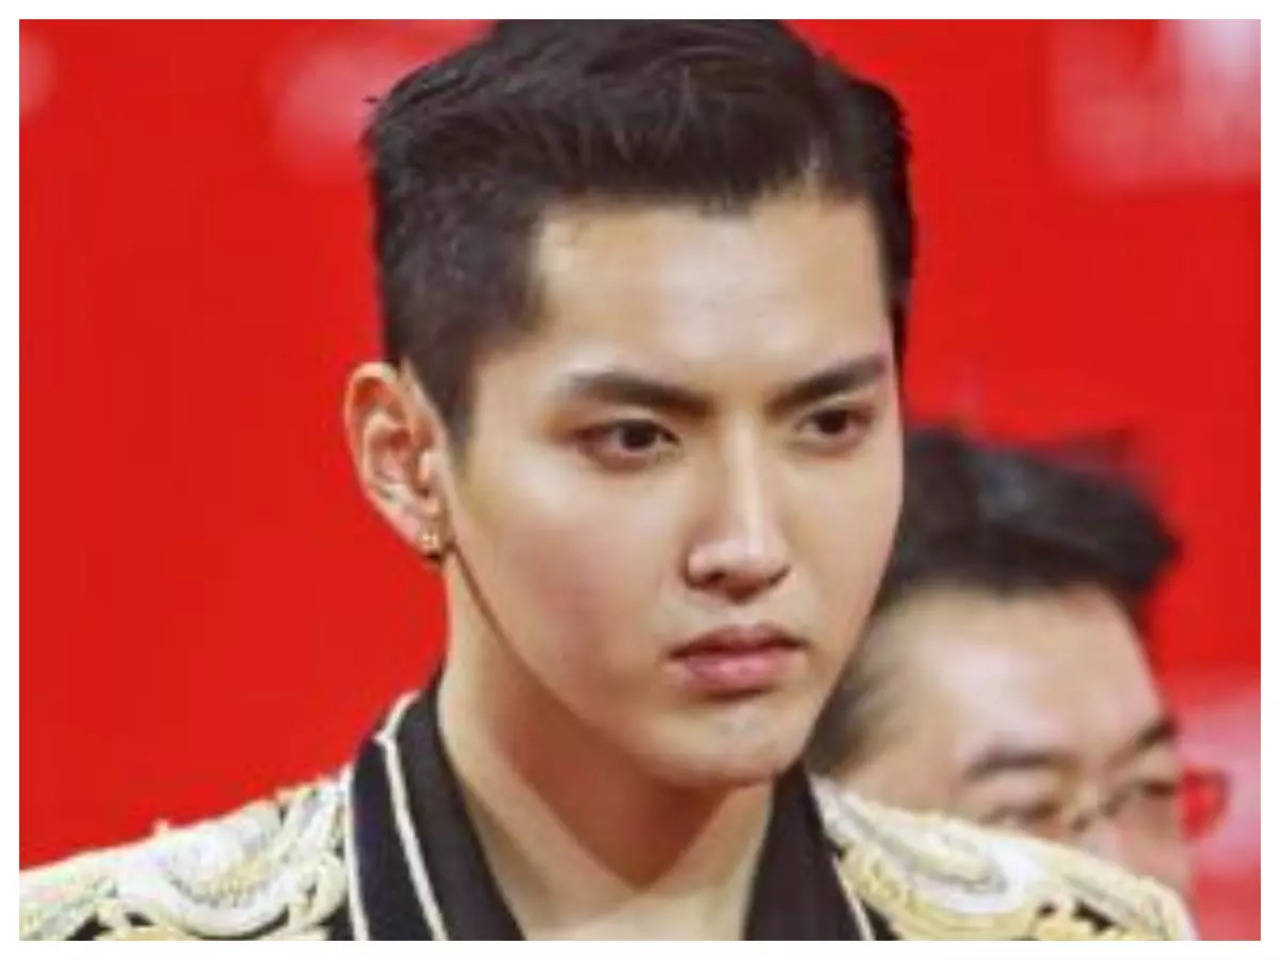 Canadian pop star Kris Wu detained over rape allegation by police in China